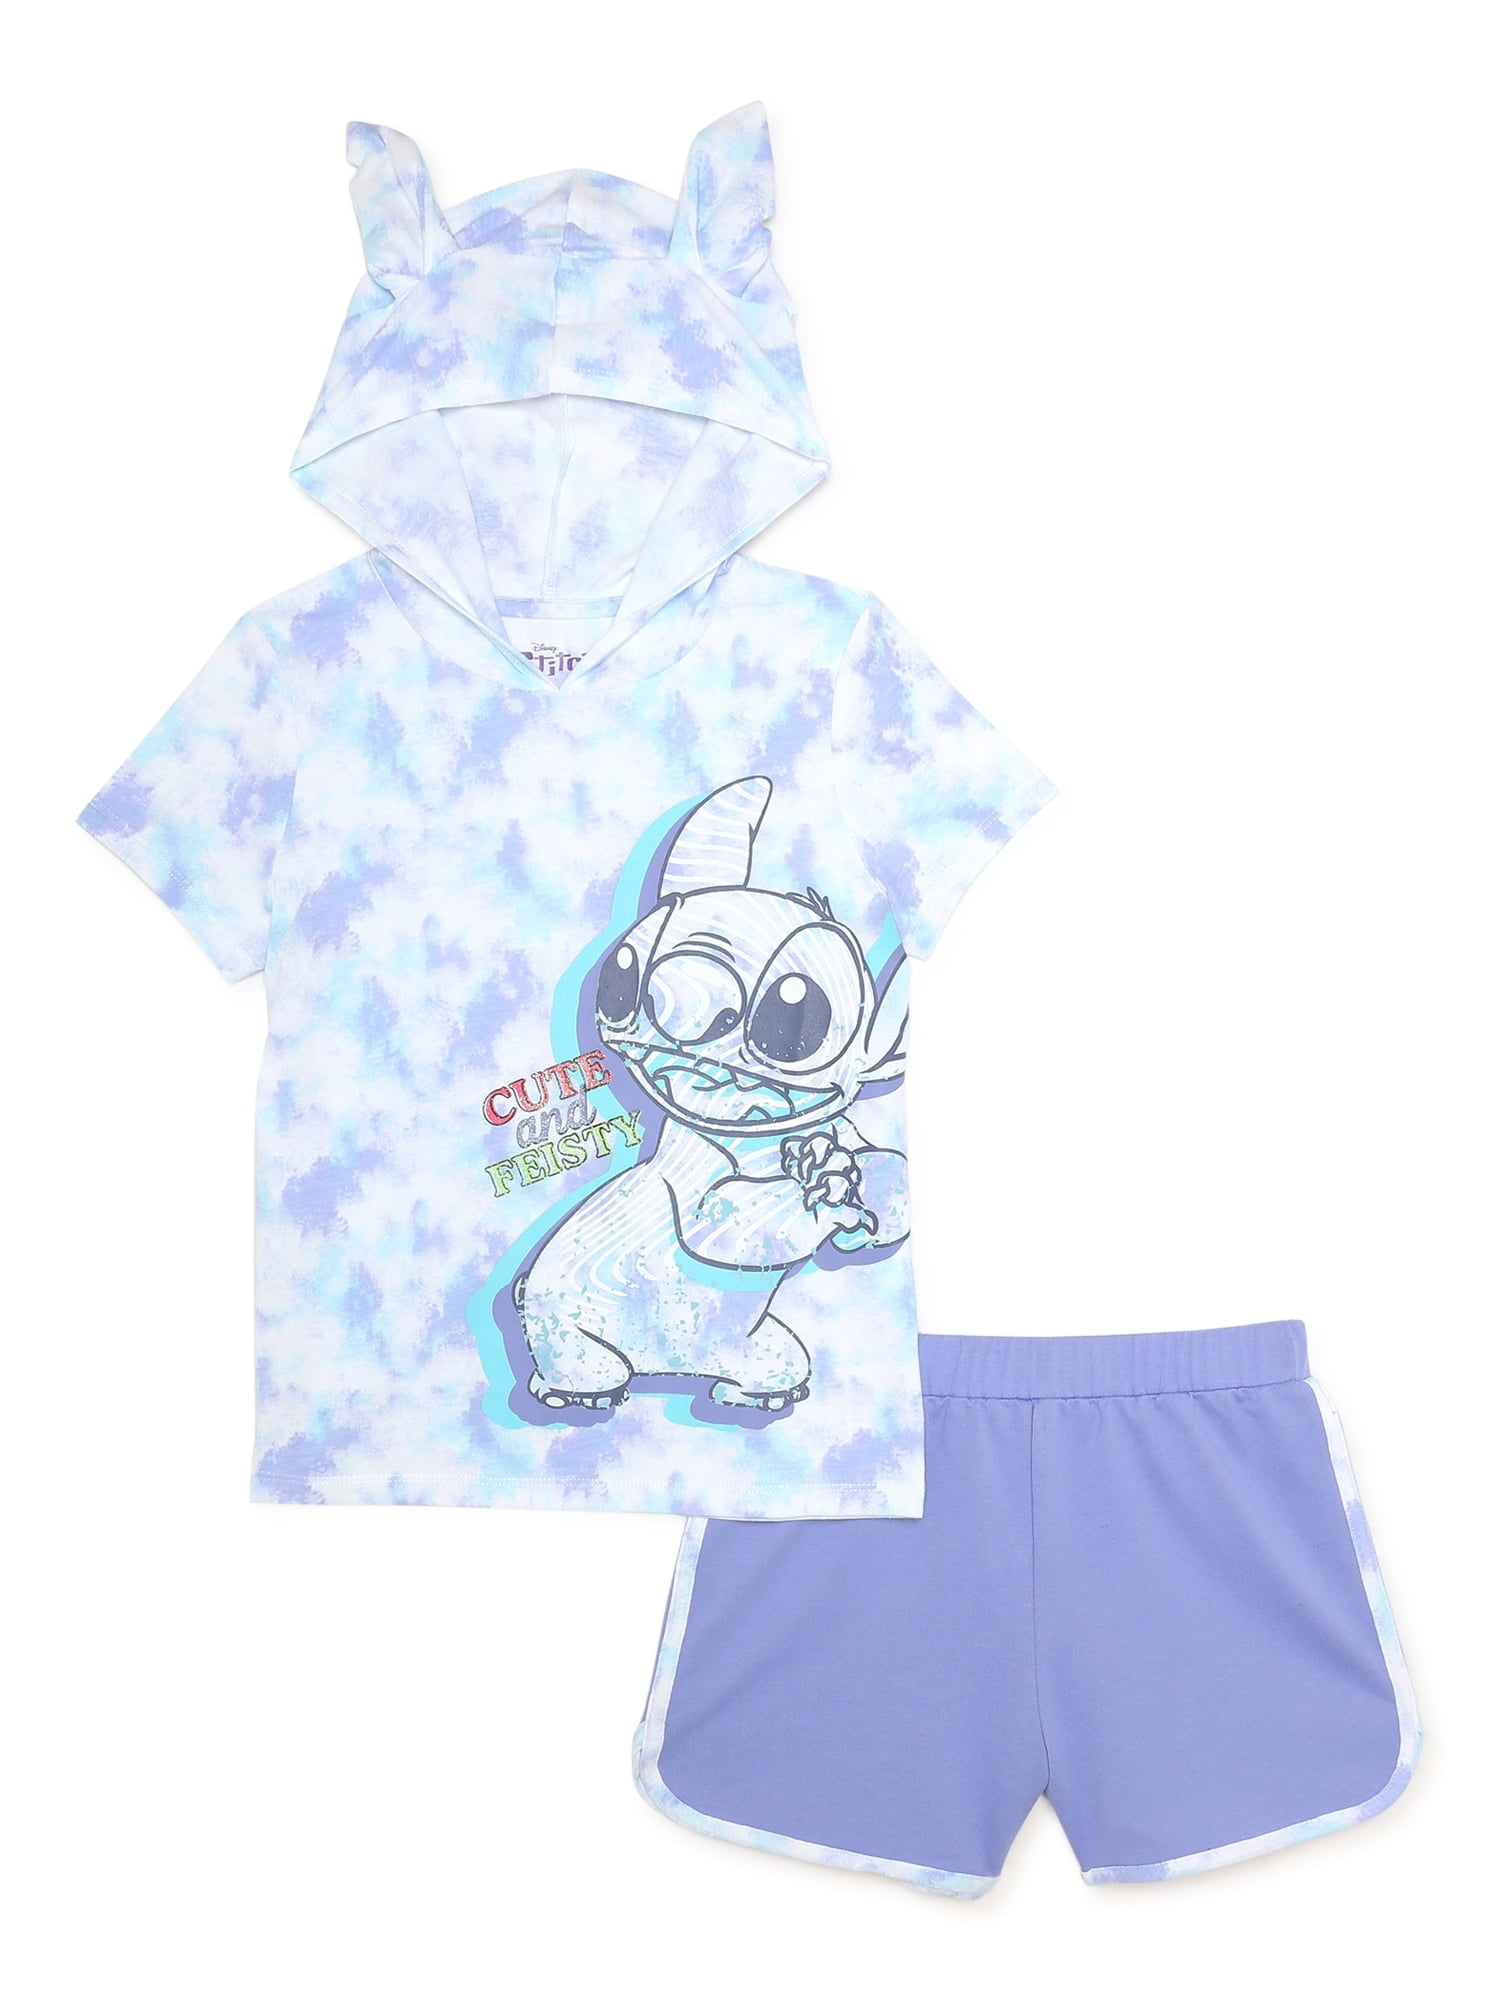 NEW Boutique Stich Girls Shorts Outfit